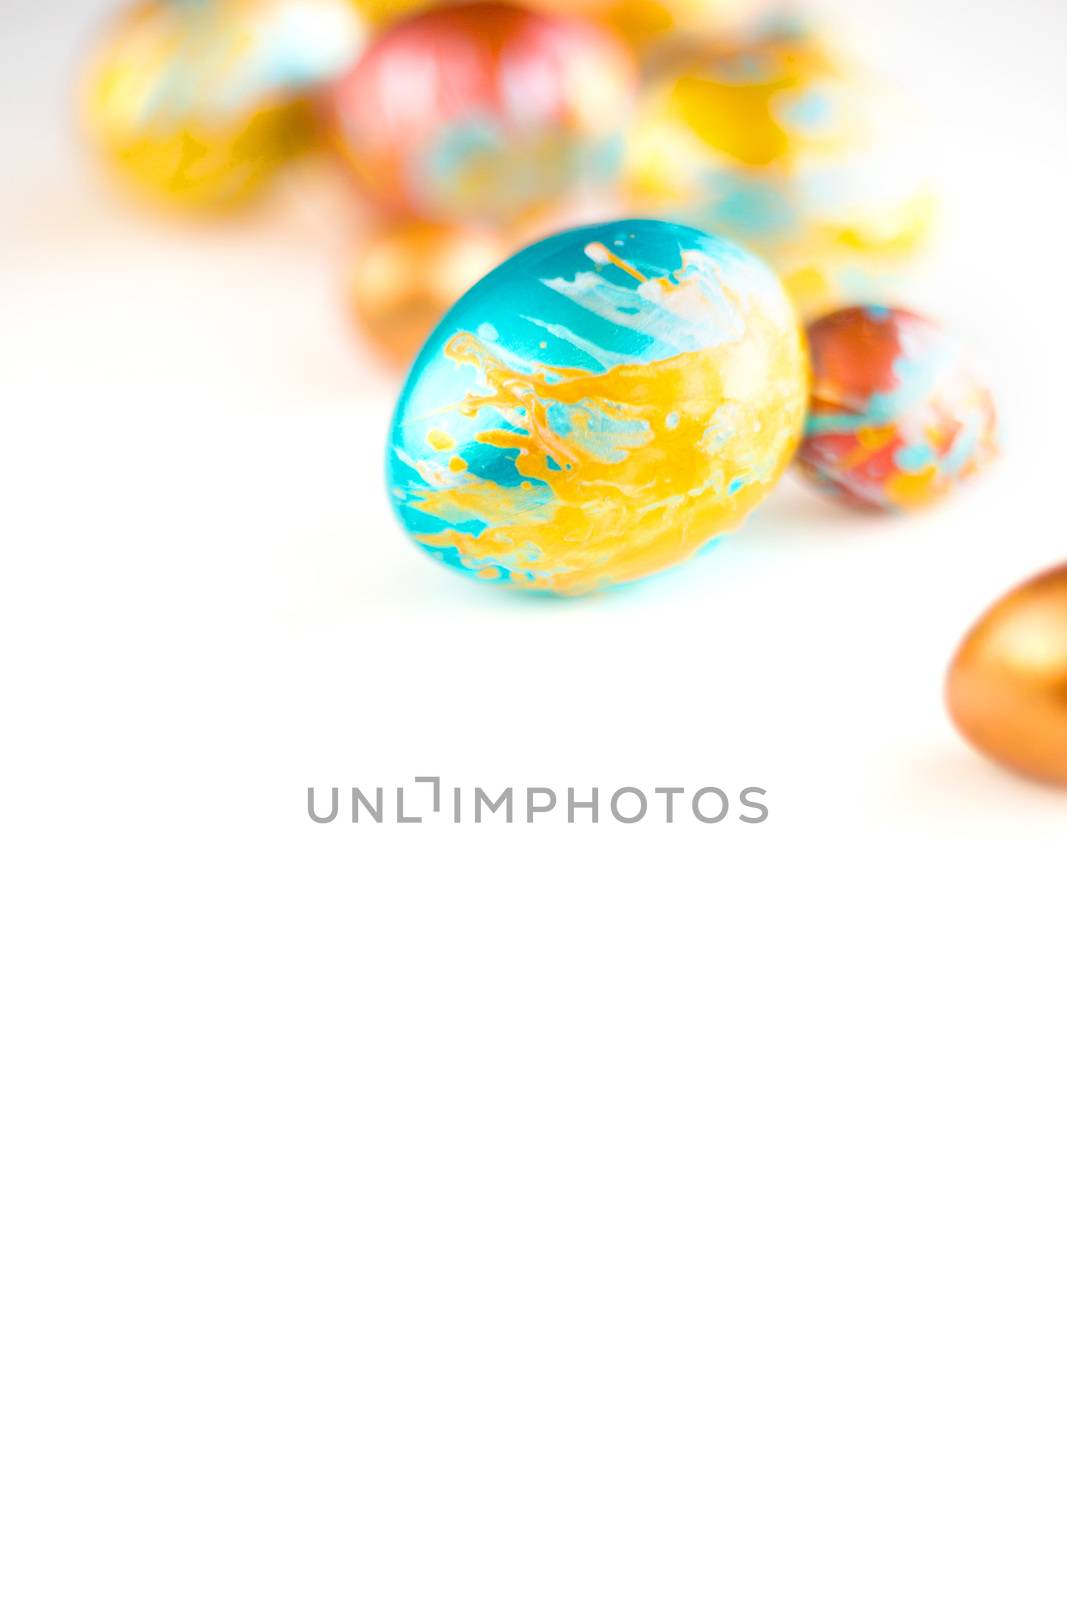 Perfect colorful handmade easter eggs isolated on white background , shape of border frame corner with copy space for text content , happy easter card